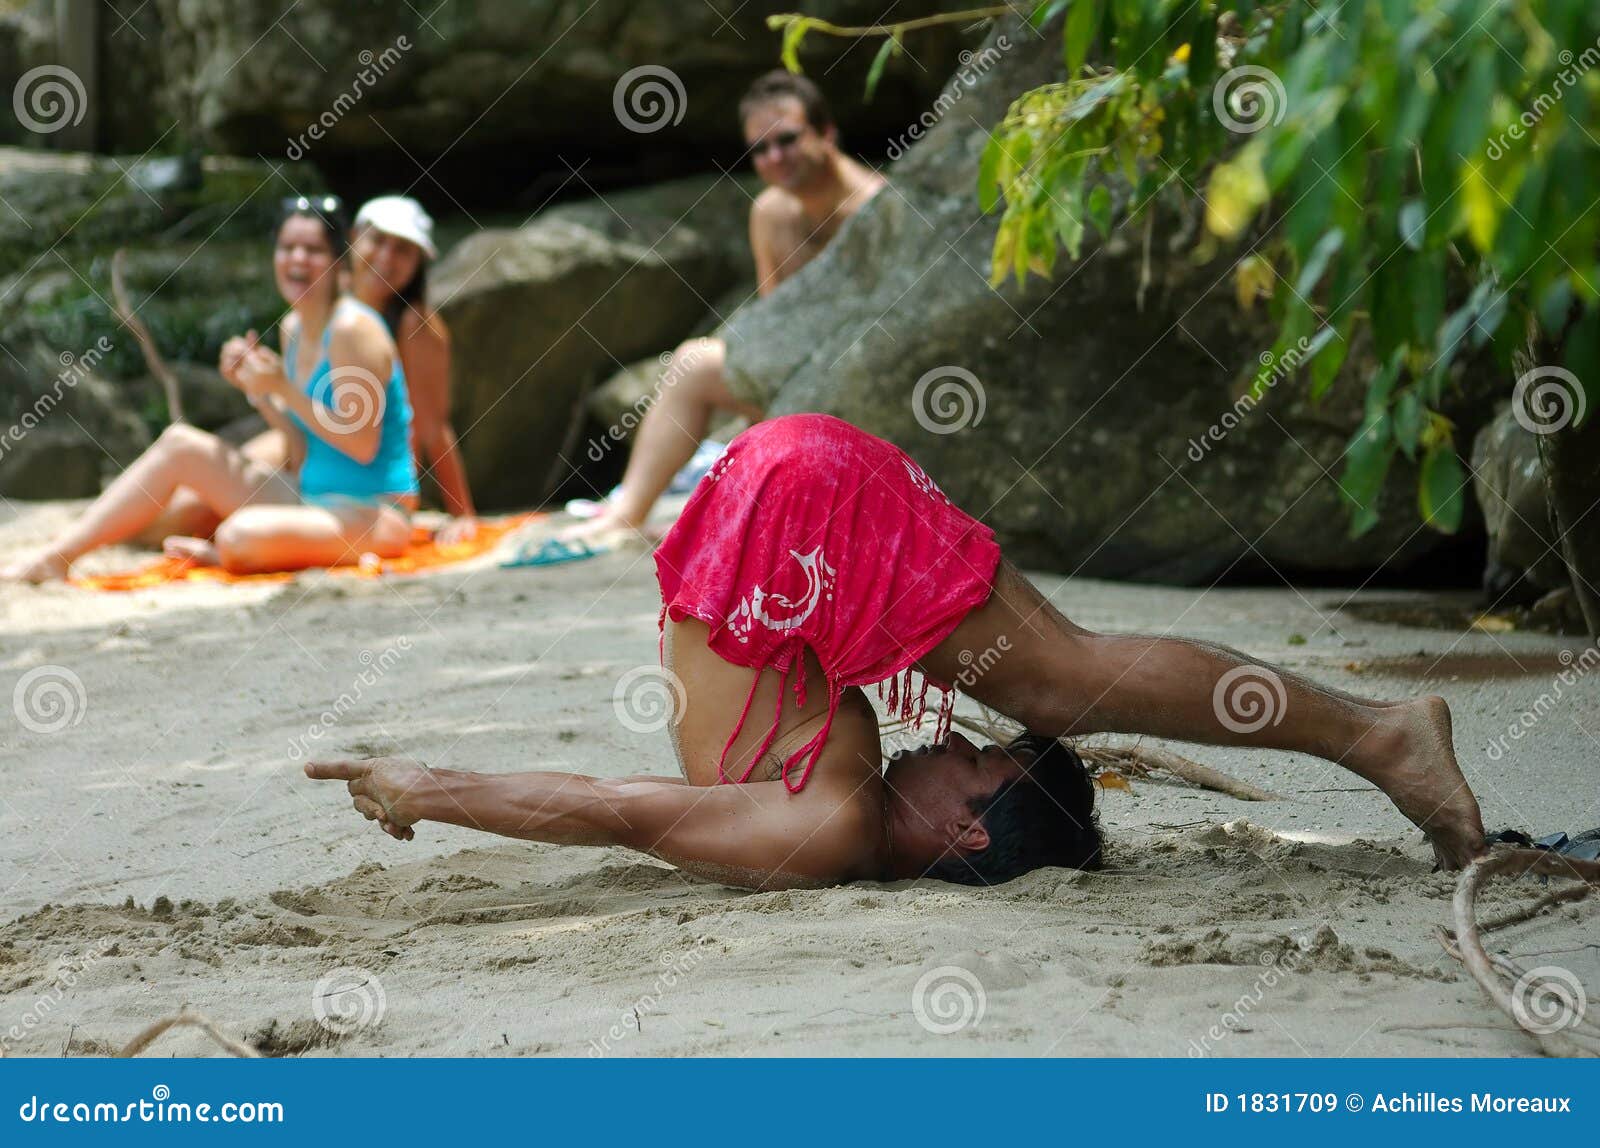 Funny Yoga Royalty Free Stock Images - Image: 1831709